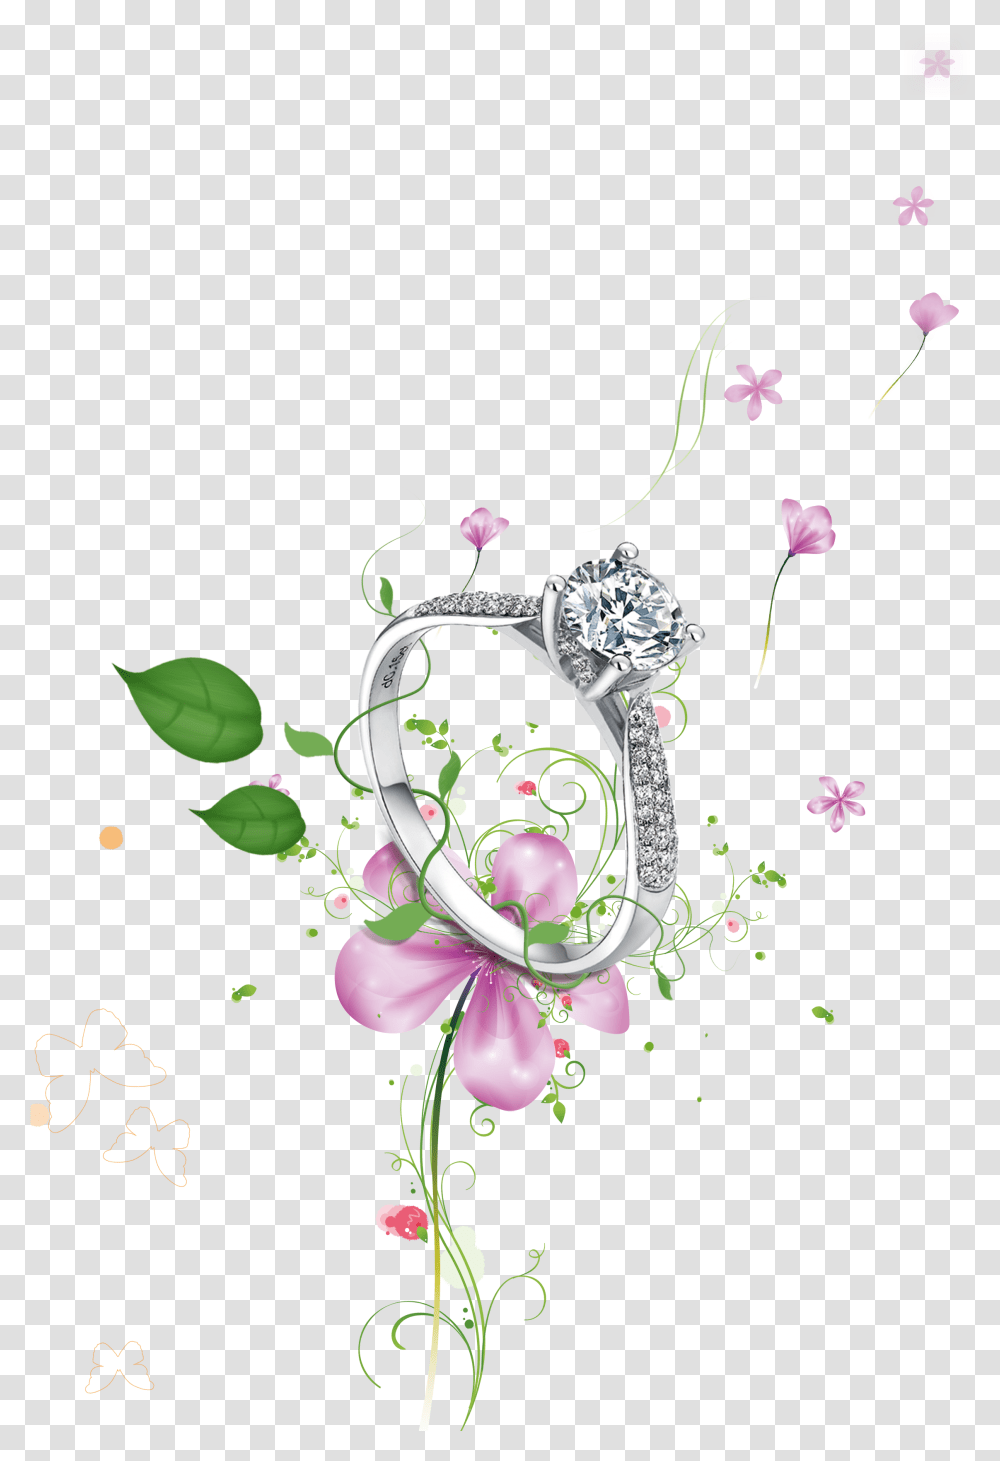 Diamond Love In Wedding Falling Ring Clipart Wedding Flower Falling, Floral Design, Pattern, Accessories Transparent Png